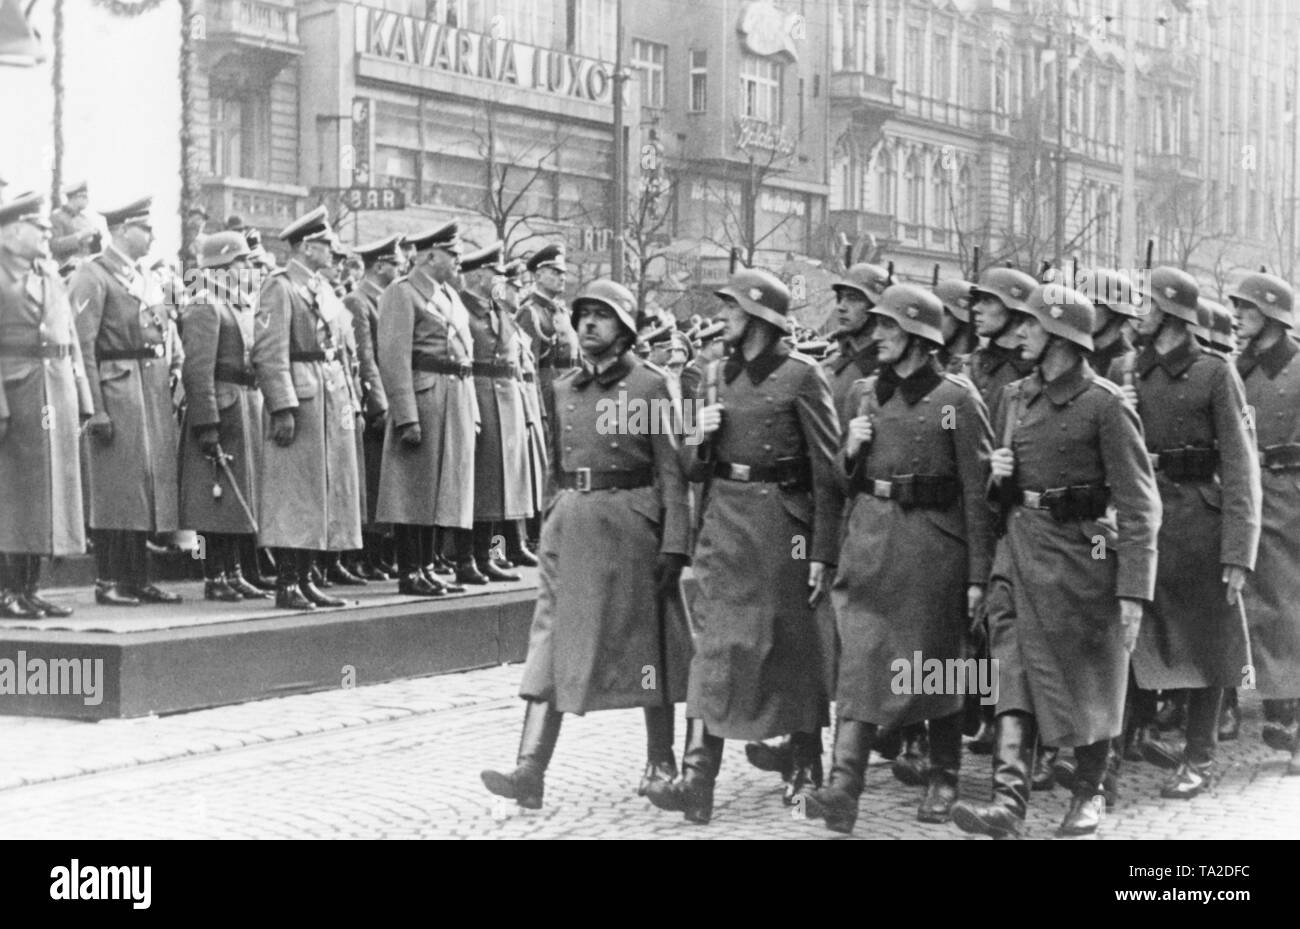 On the occasion of the anniversary of the establishment of the Protectorate of Bohemia and Moravia, a military parade takes place at Wenceslas Square. The troops march past the VIP stand. Stock Photo